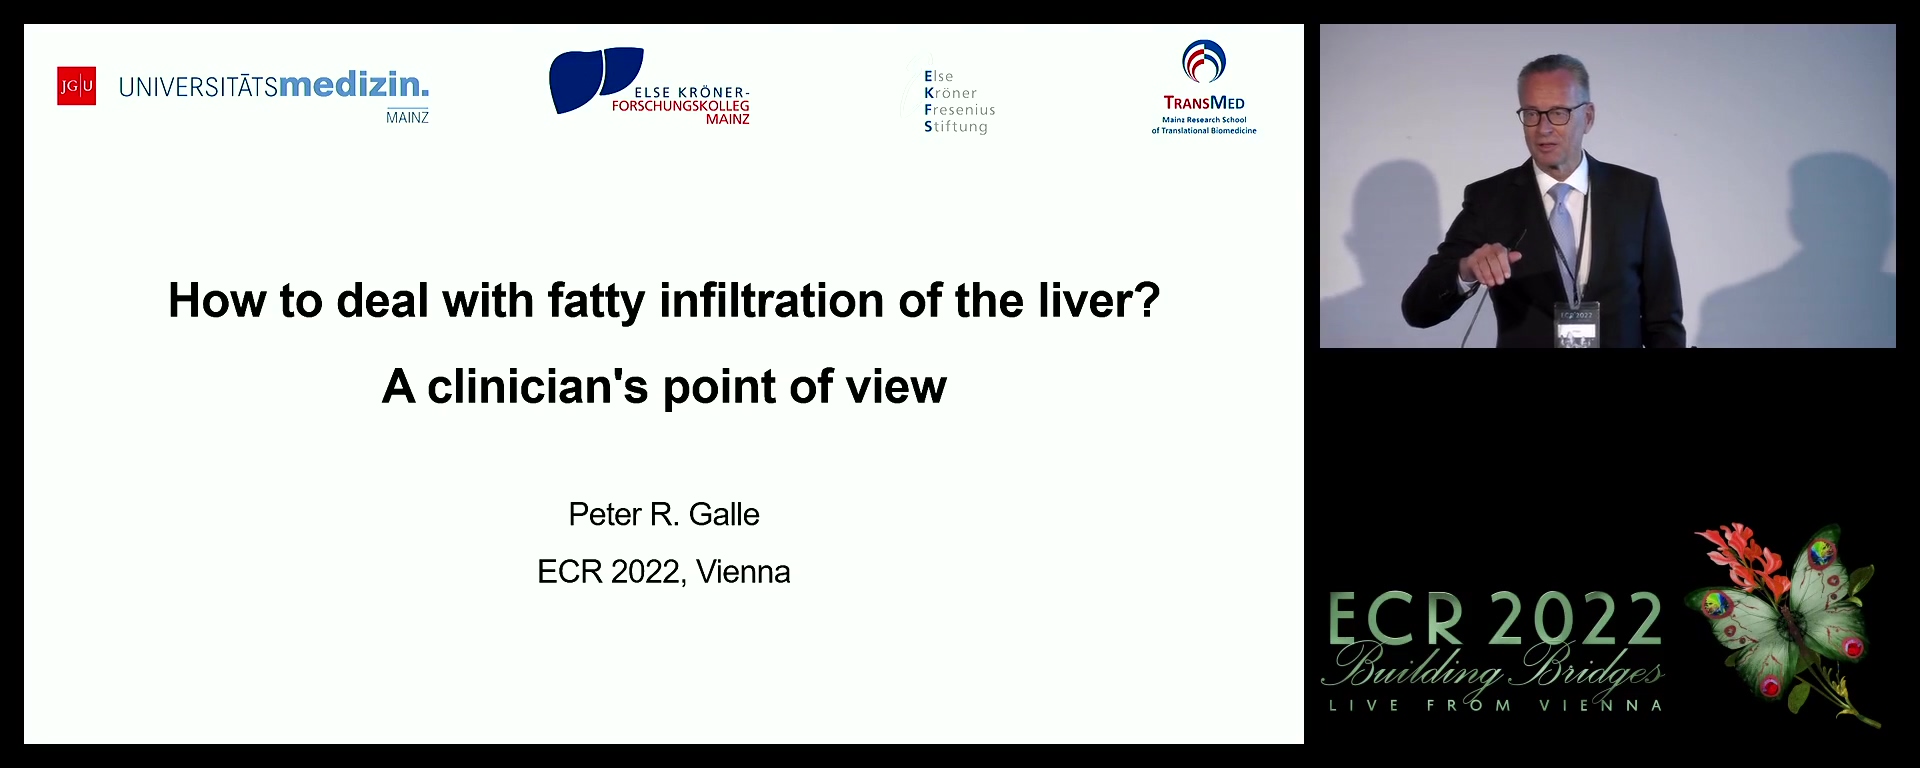 How to deal with fatty infiltration of the liver? A clinician's point of view